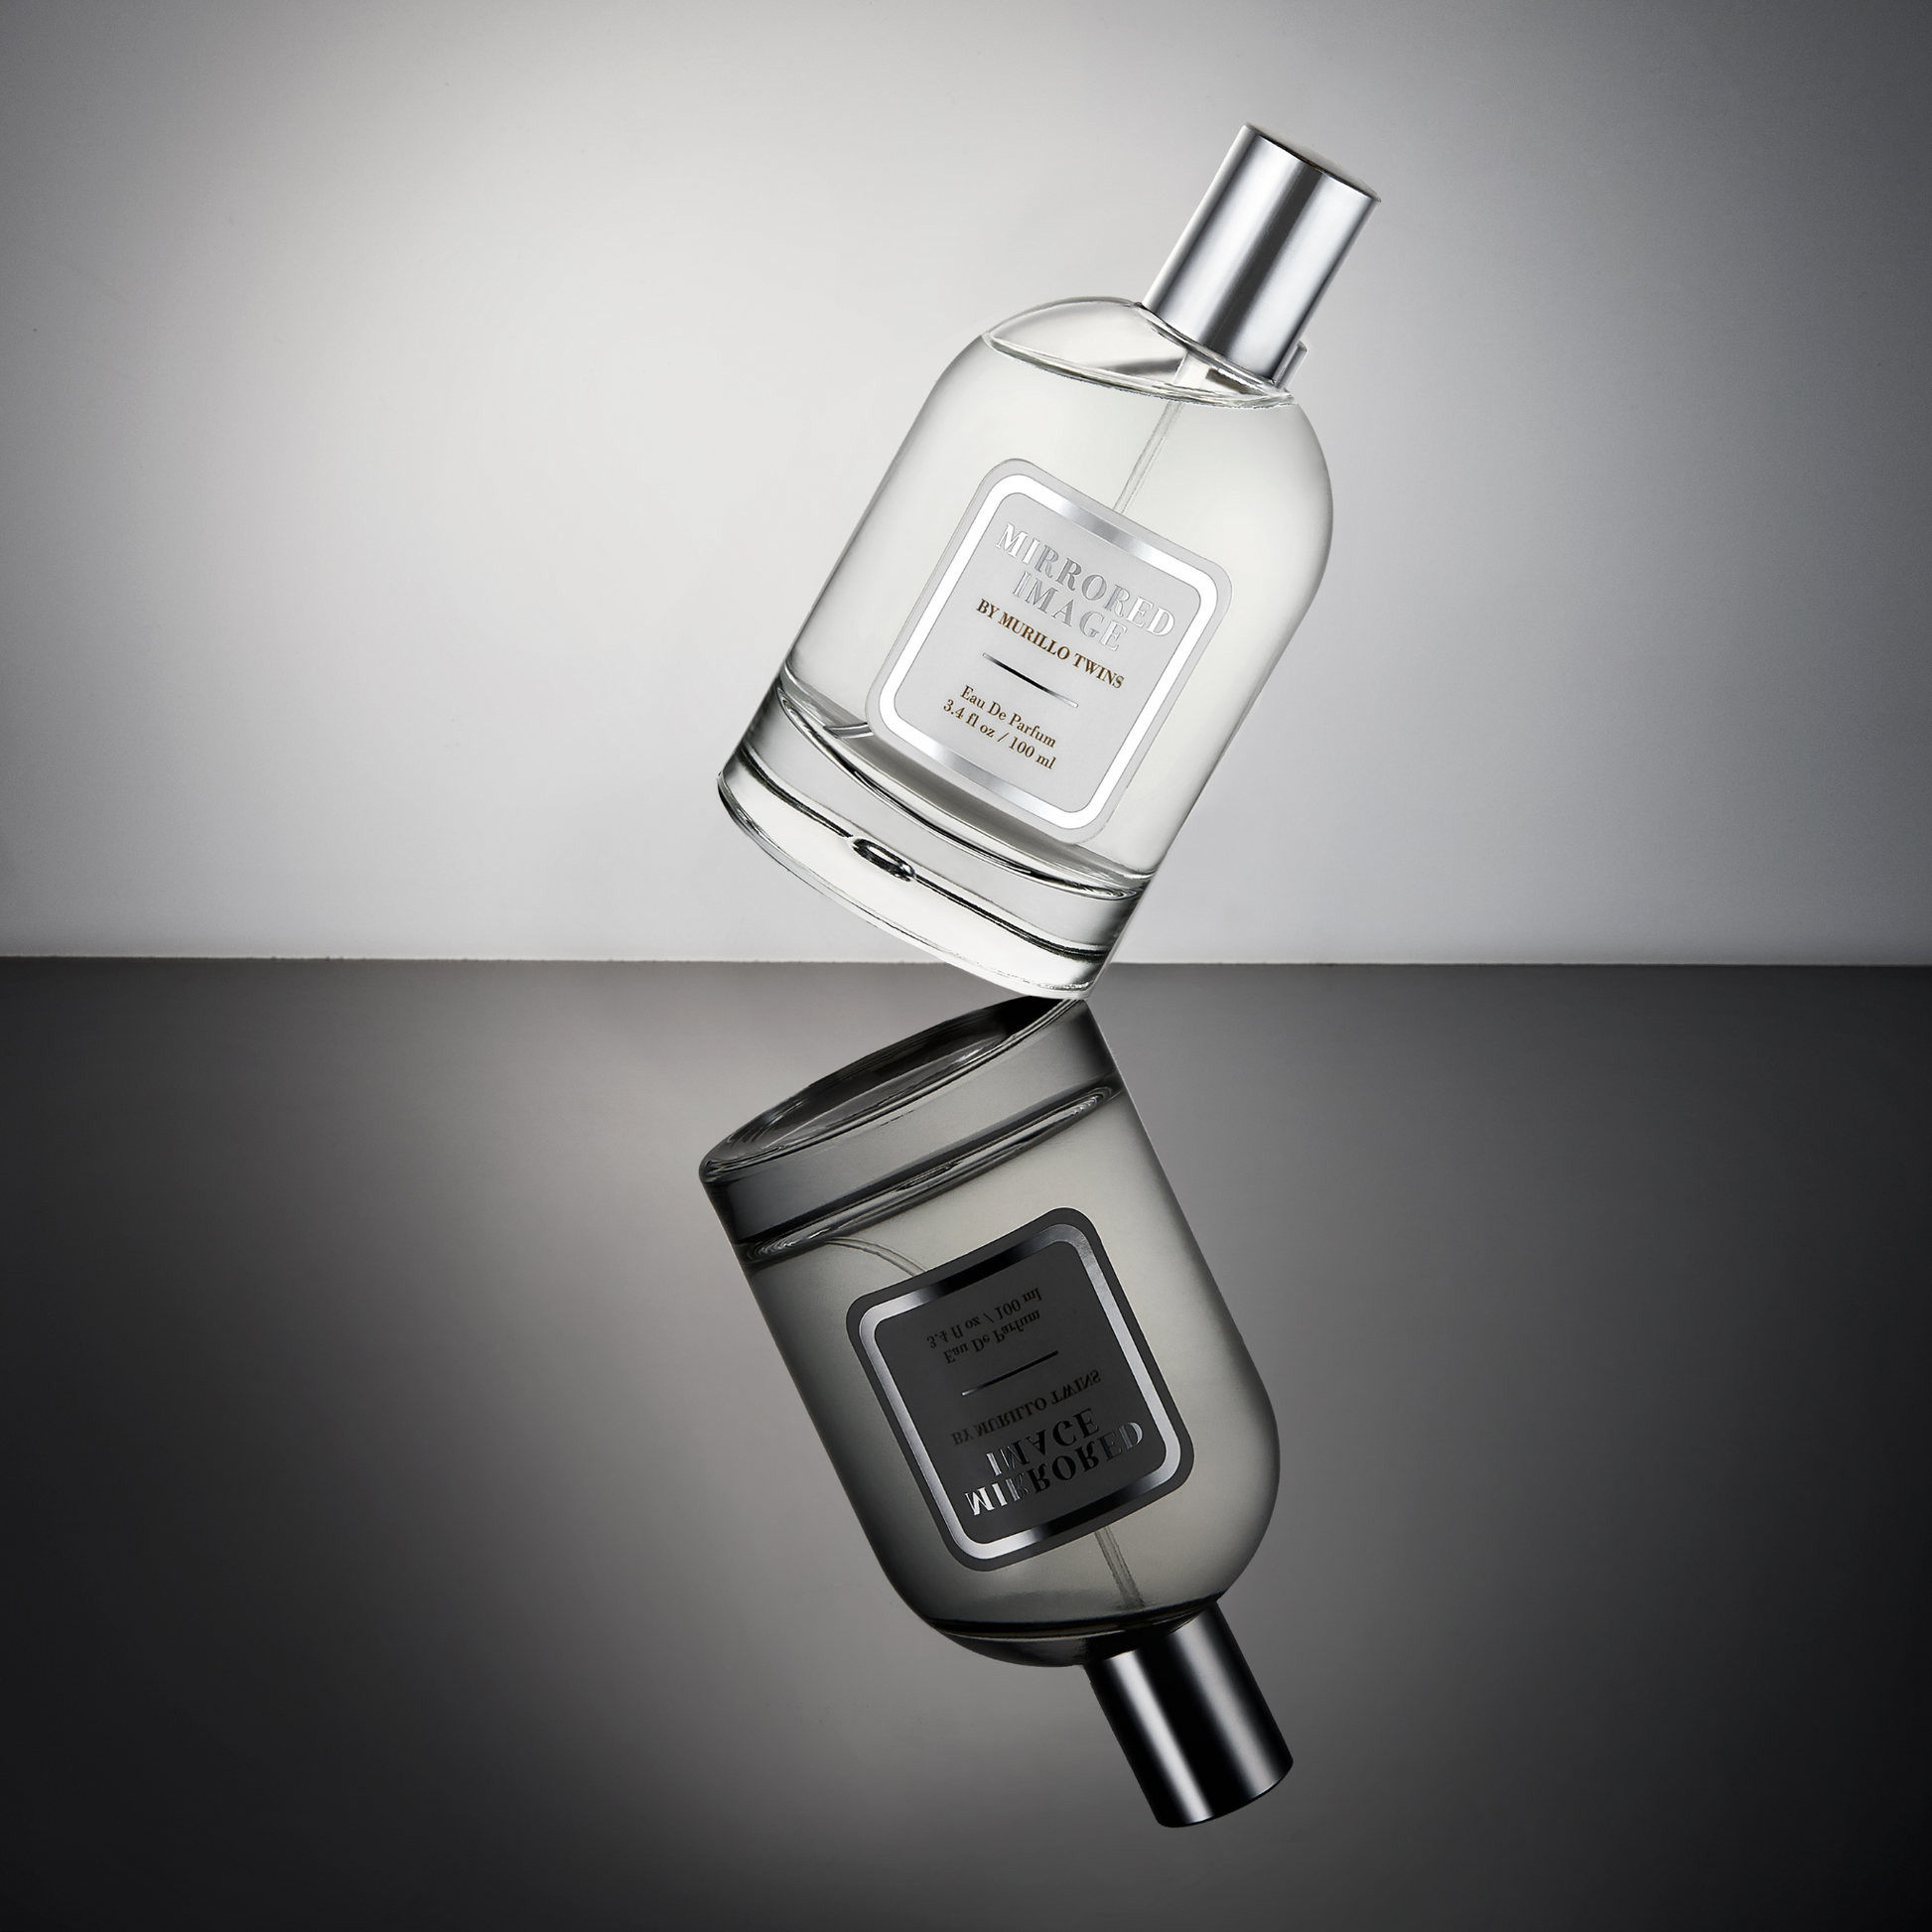 The Mirrored Image fragrance by The Murillo Twins displayed in a captivating product image, tilted on its side, showcasing elegance and uniqueness in its design.